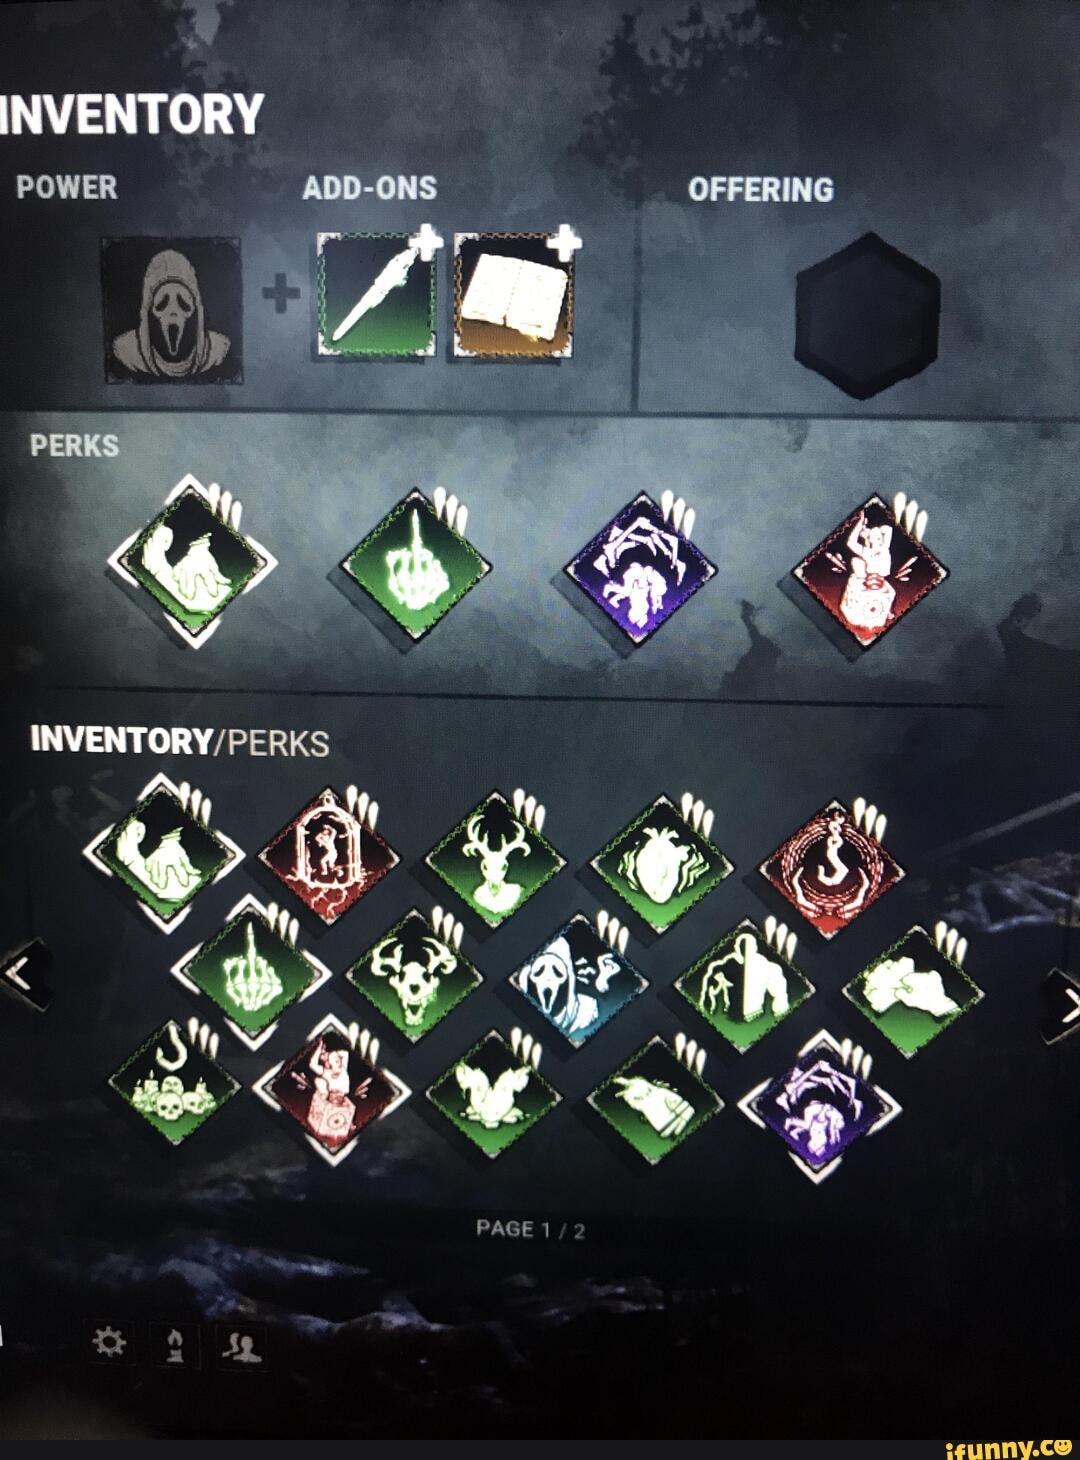 INVENTORY POWER ADD-ONS OFFERING PERKS INVENTORY PERKS ty, PAGE - iFunny